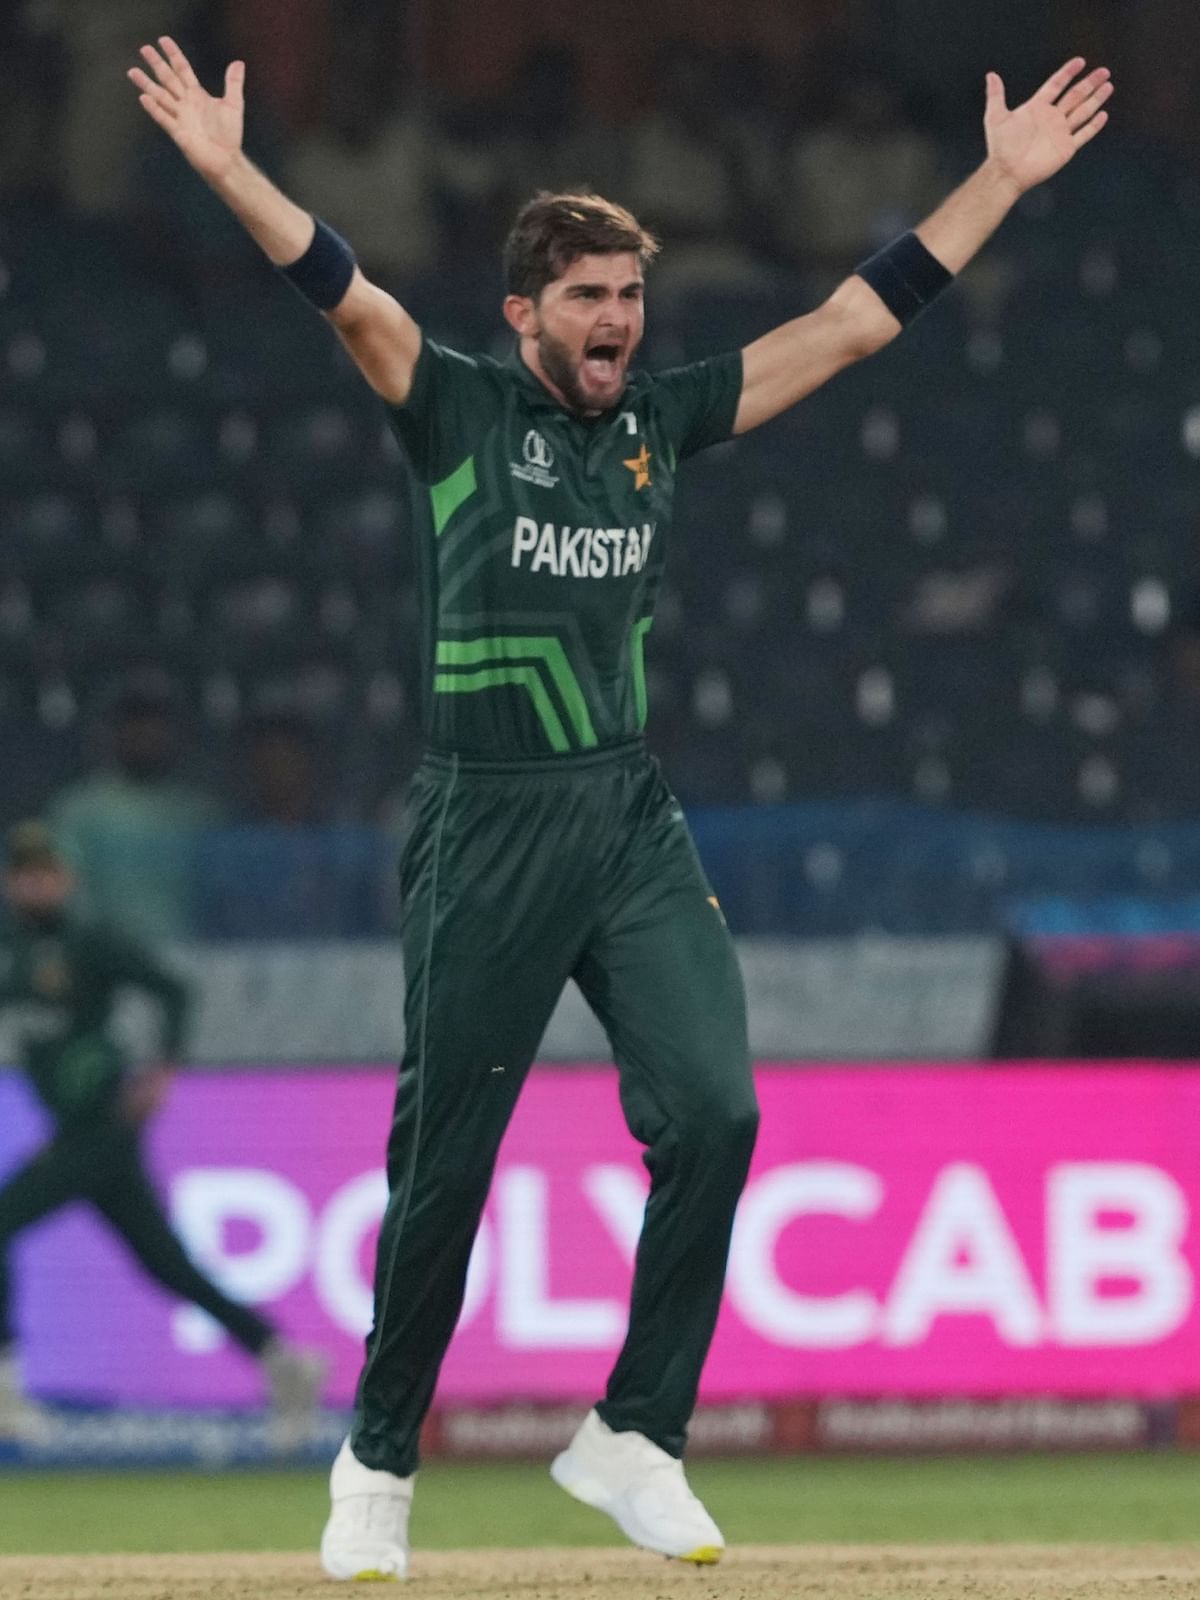 The Pakistani pacer Shaheen Afridi will try and disrupt the Australian batting line-up with the new ball and restrict the team from putting up a big score on board.